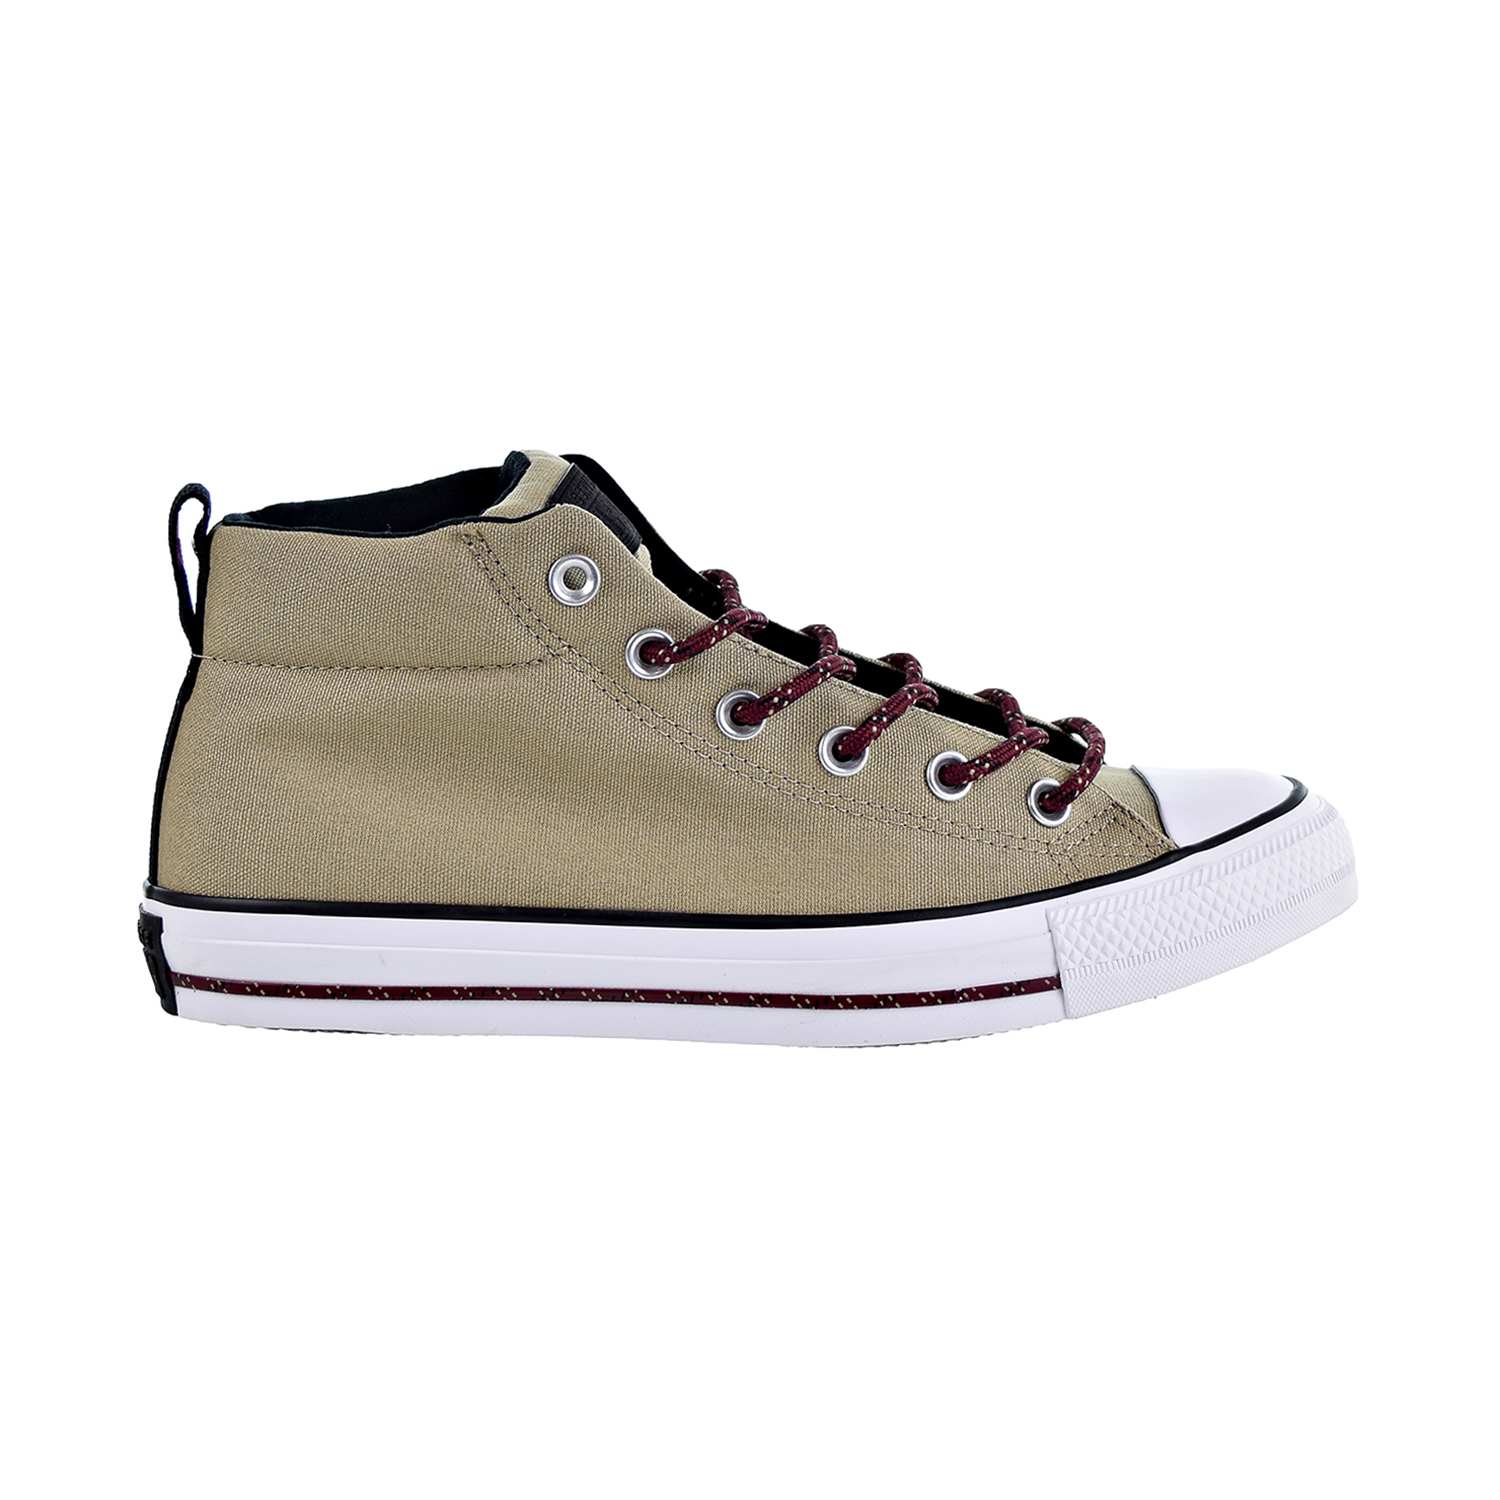 Converse Chuck Taylor All Star Street Mid Unisex Shoes Khaki/Black/White 162383f - image 1 of 6